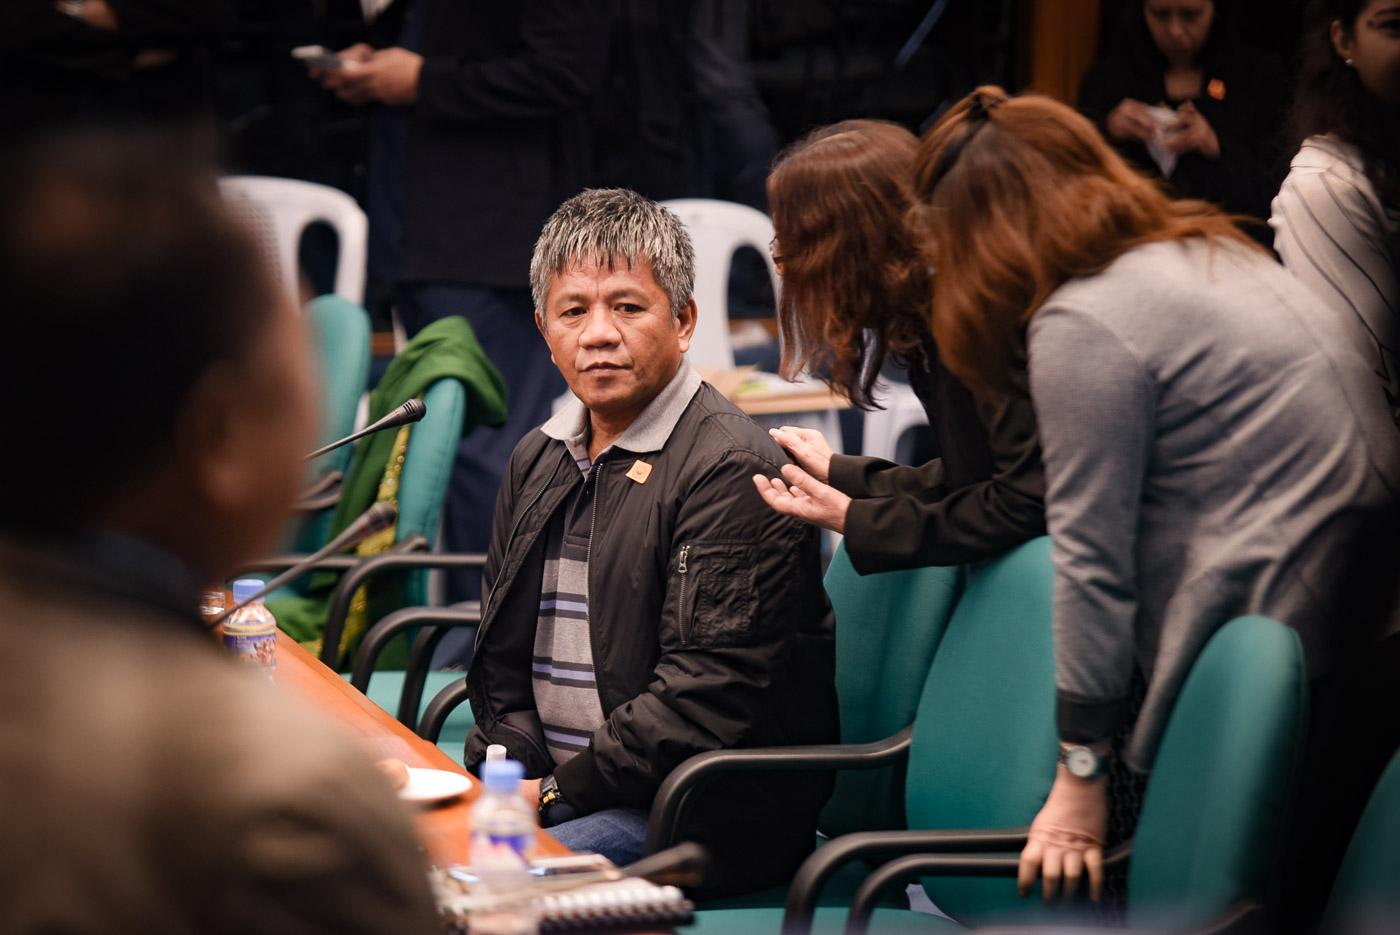 SENATE INQUIRY. Witness Edgar Matobato faces a Senate inquiry into the spate of killings under the Duterte administration on September 15, 2016. Photo by LeAnne Jazul/Rappler   